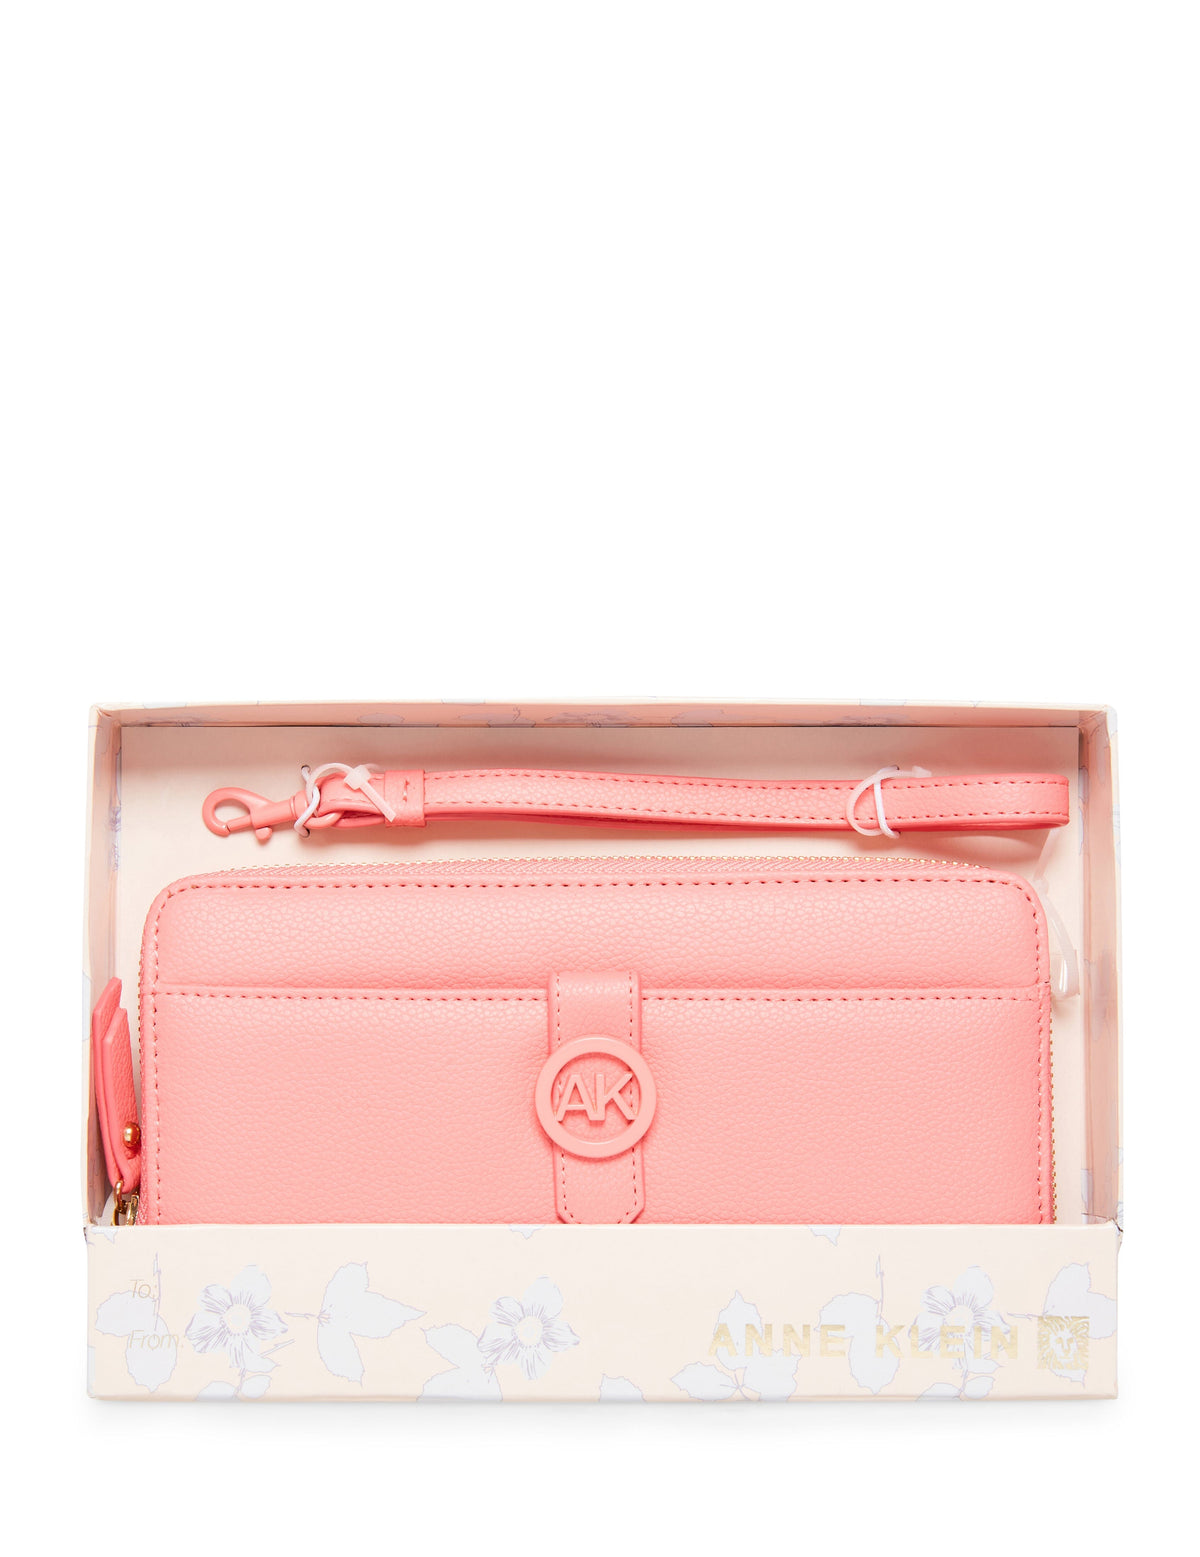 Anne Klein Fruit punch Boxed Slim Zip Wallet With AK Coated Hardware &amp; Detachable Wristlet